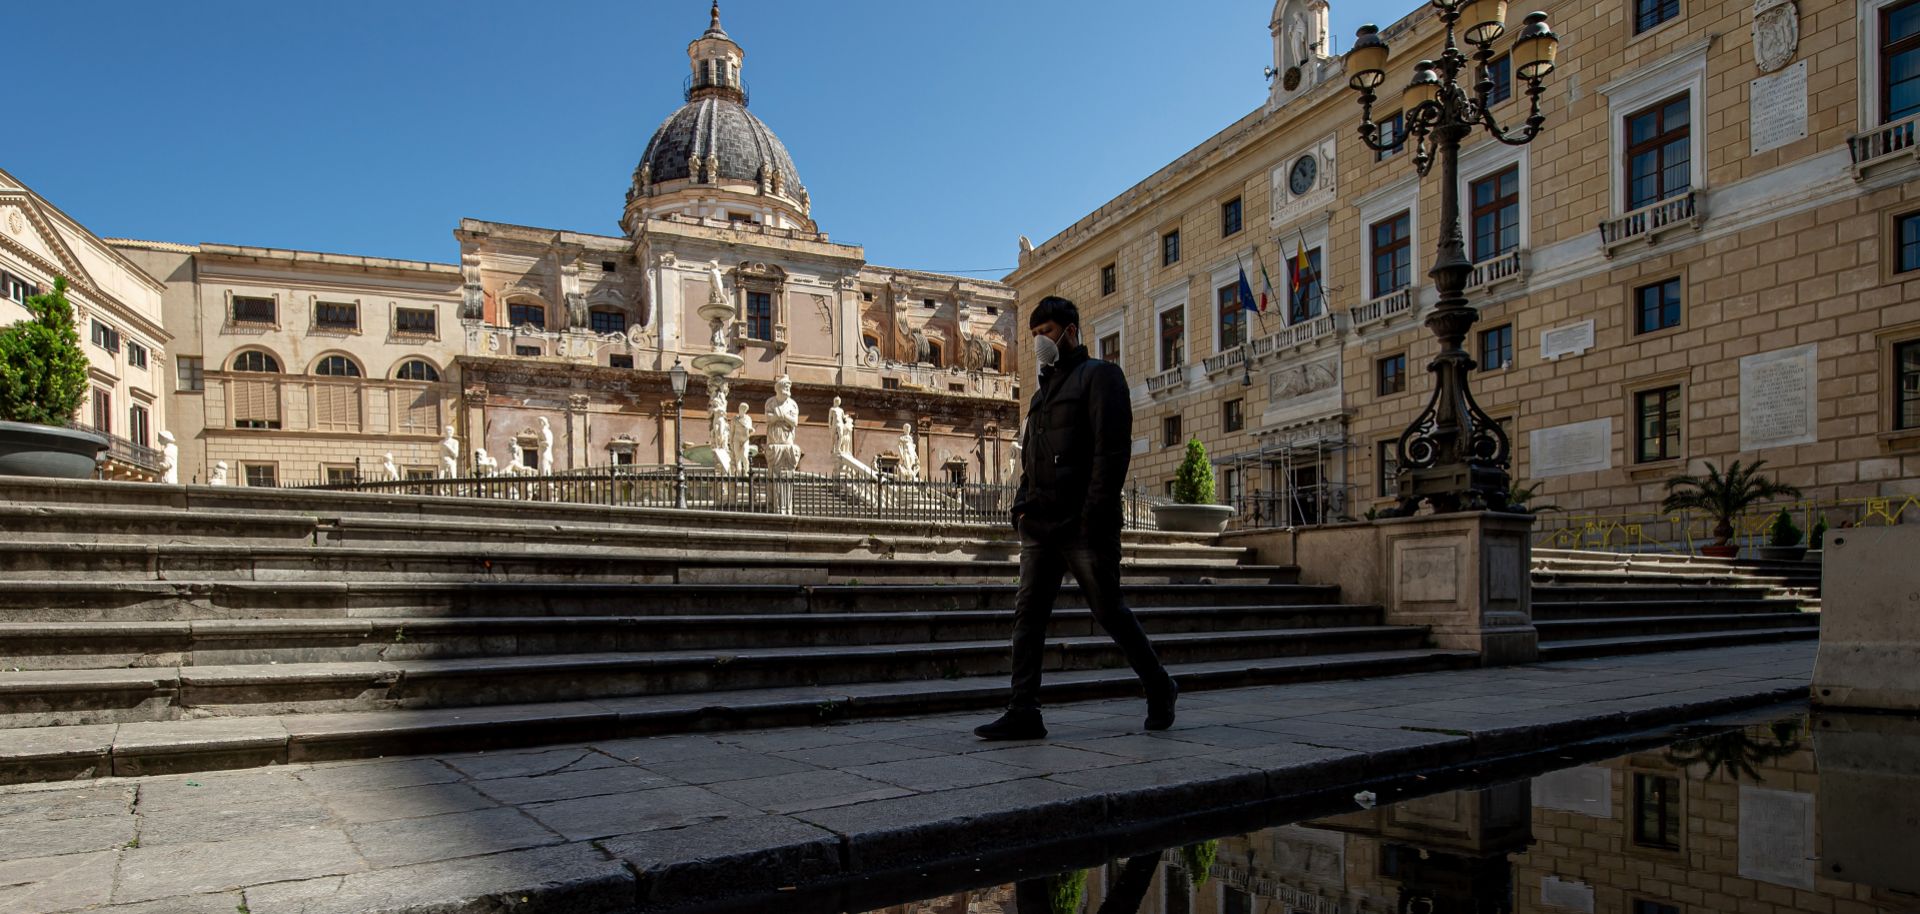 A man wearing a face mask walks in Pretoria square in Palermo, Italy, on March 11, 2020.